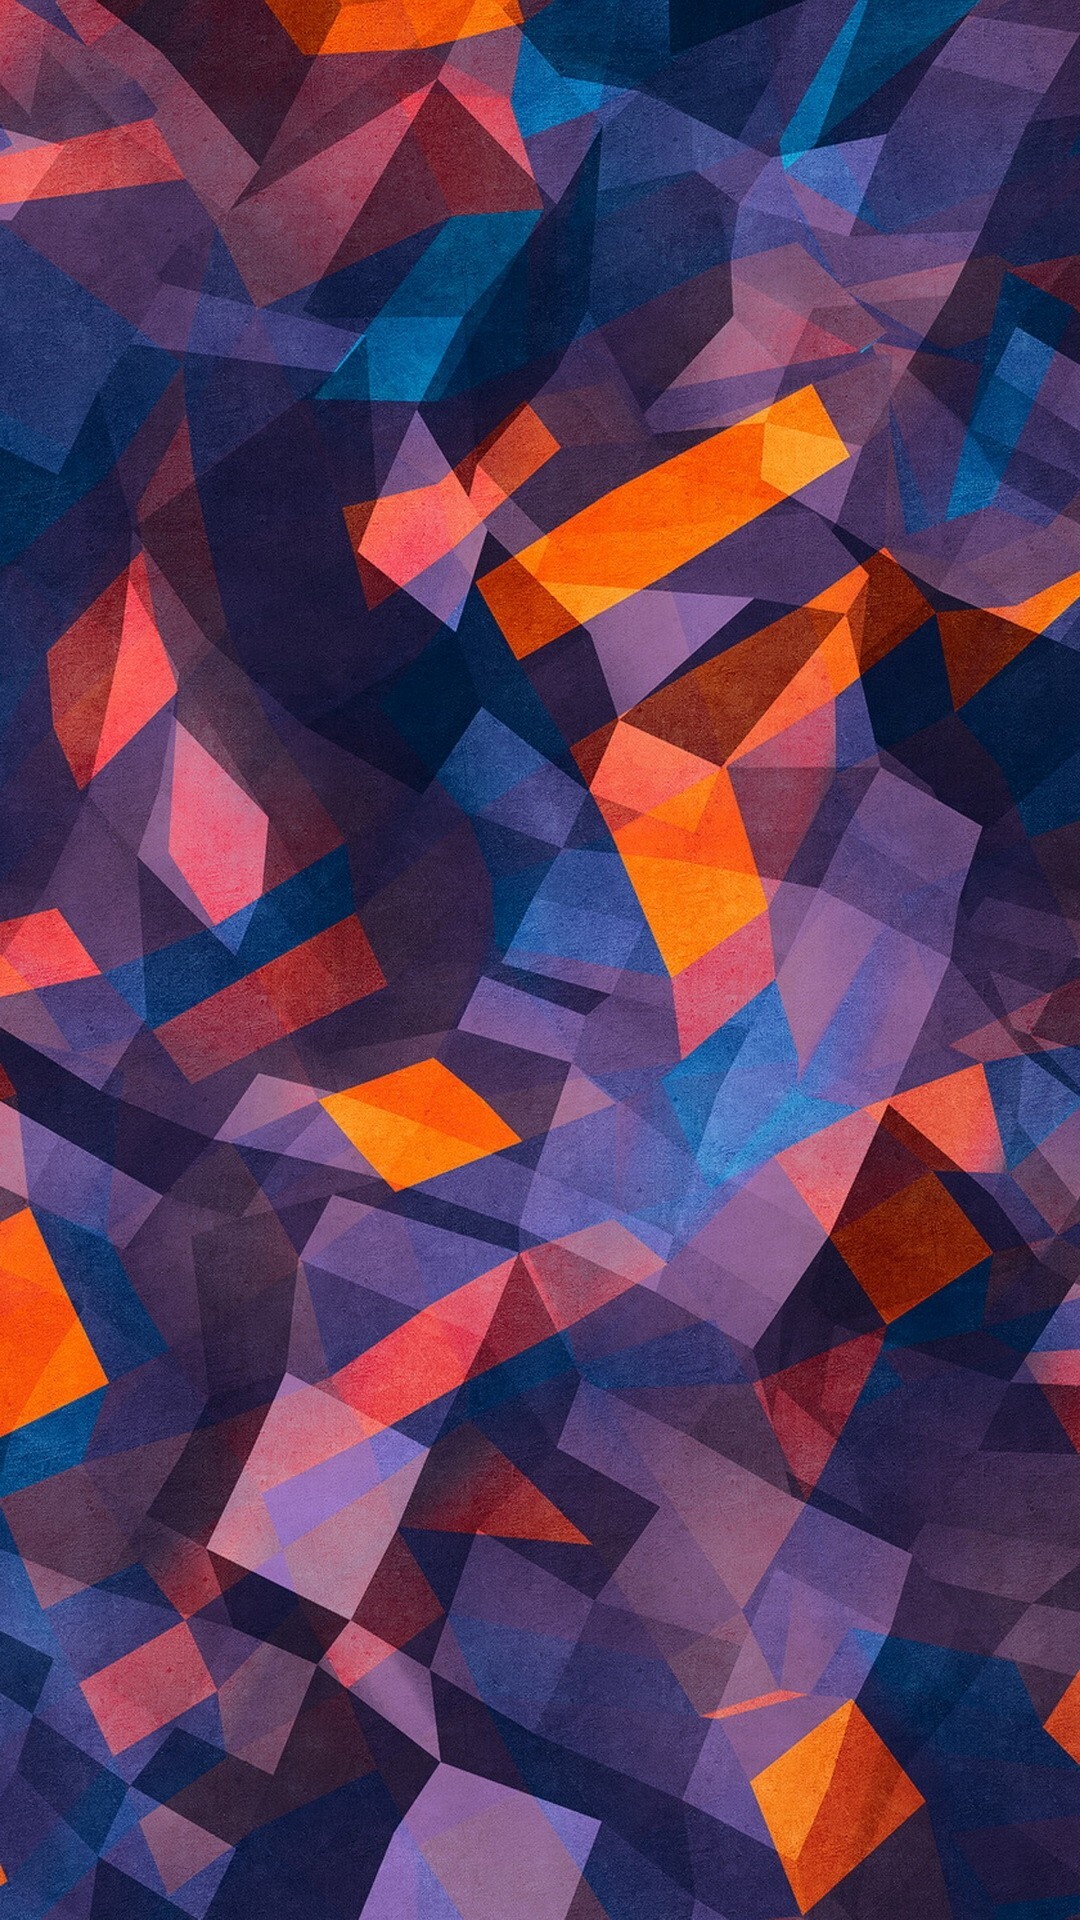 Geometric Abstract: Obtuse angled triangles, Rhombus, Rectangles. 1080x1920 Full HD Wallpaper.